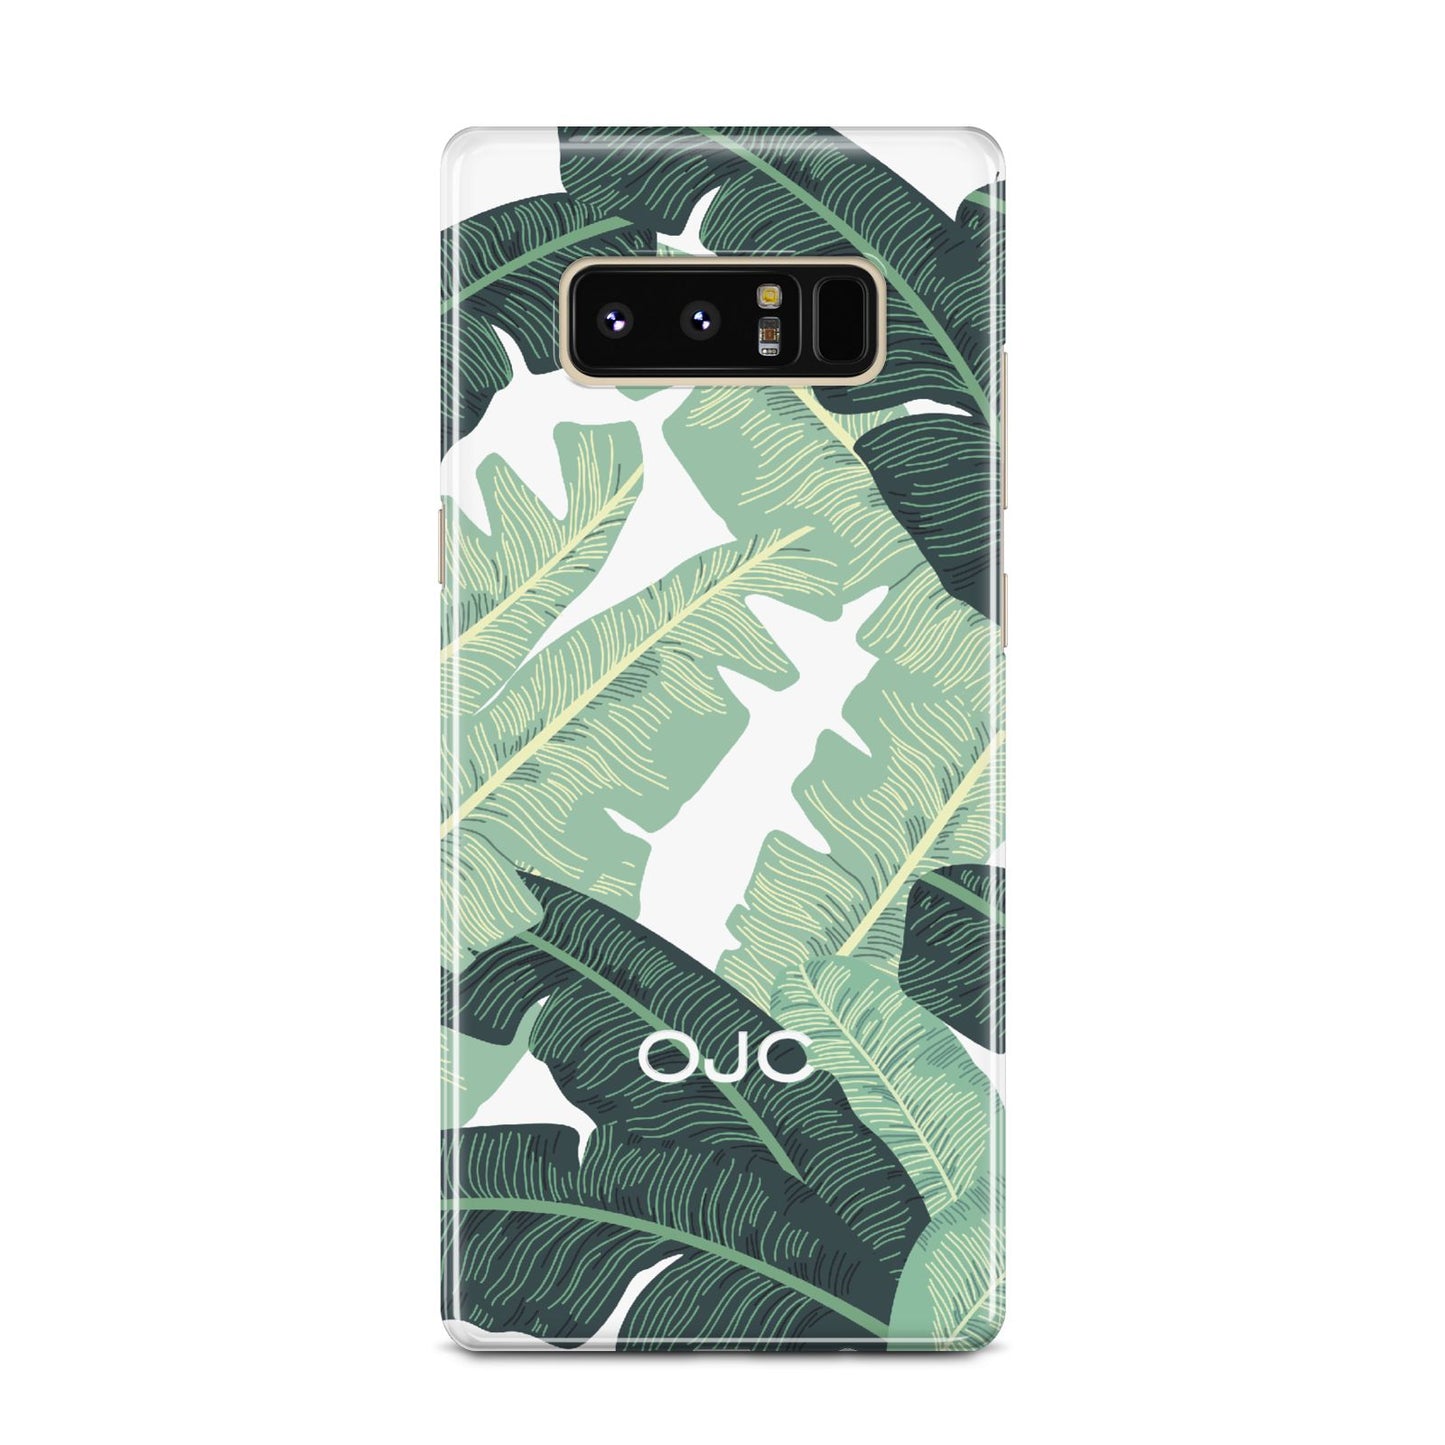 Personalised Palm Banana Leaf Samsung Galaxy Note 8 Case